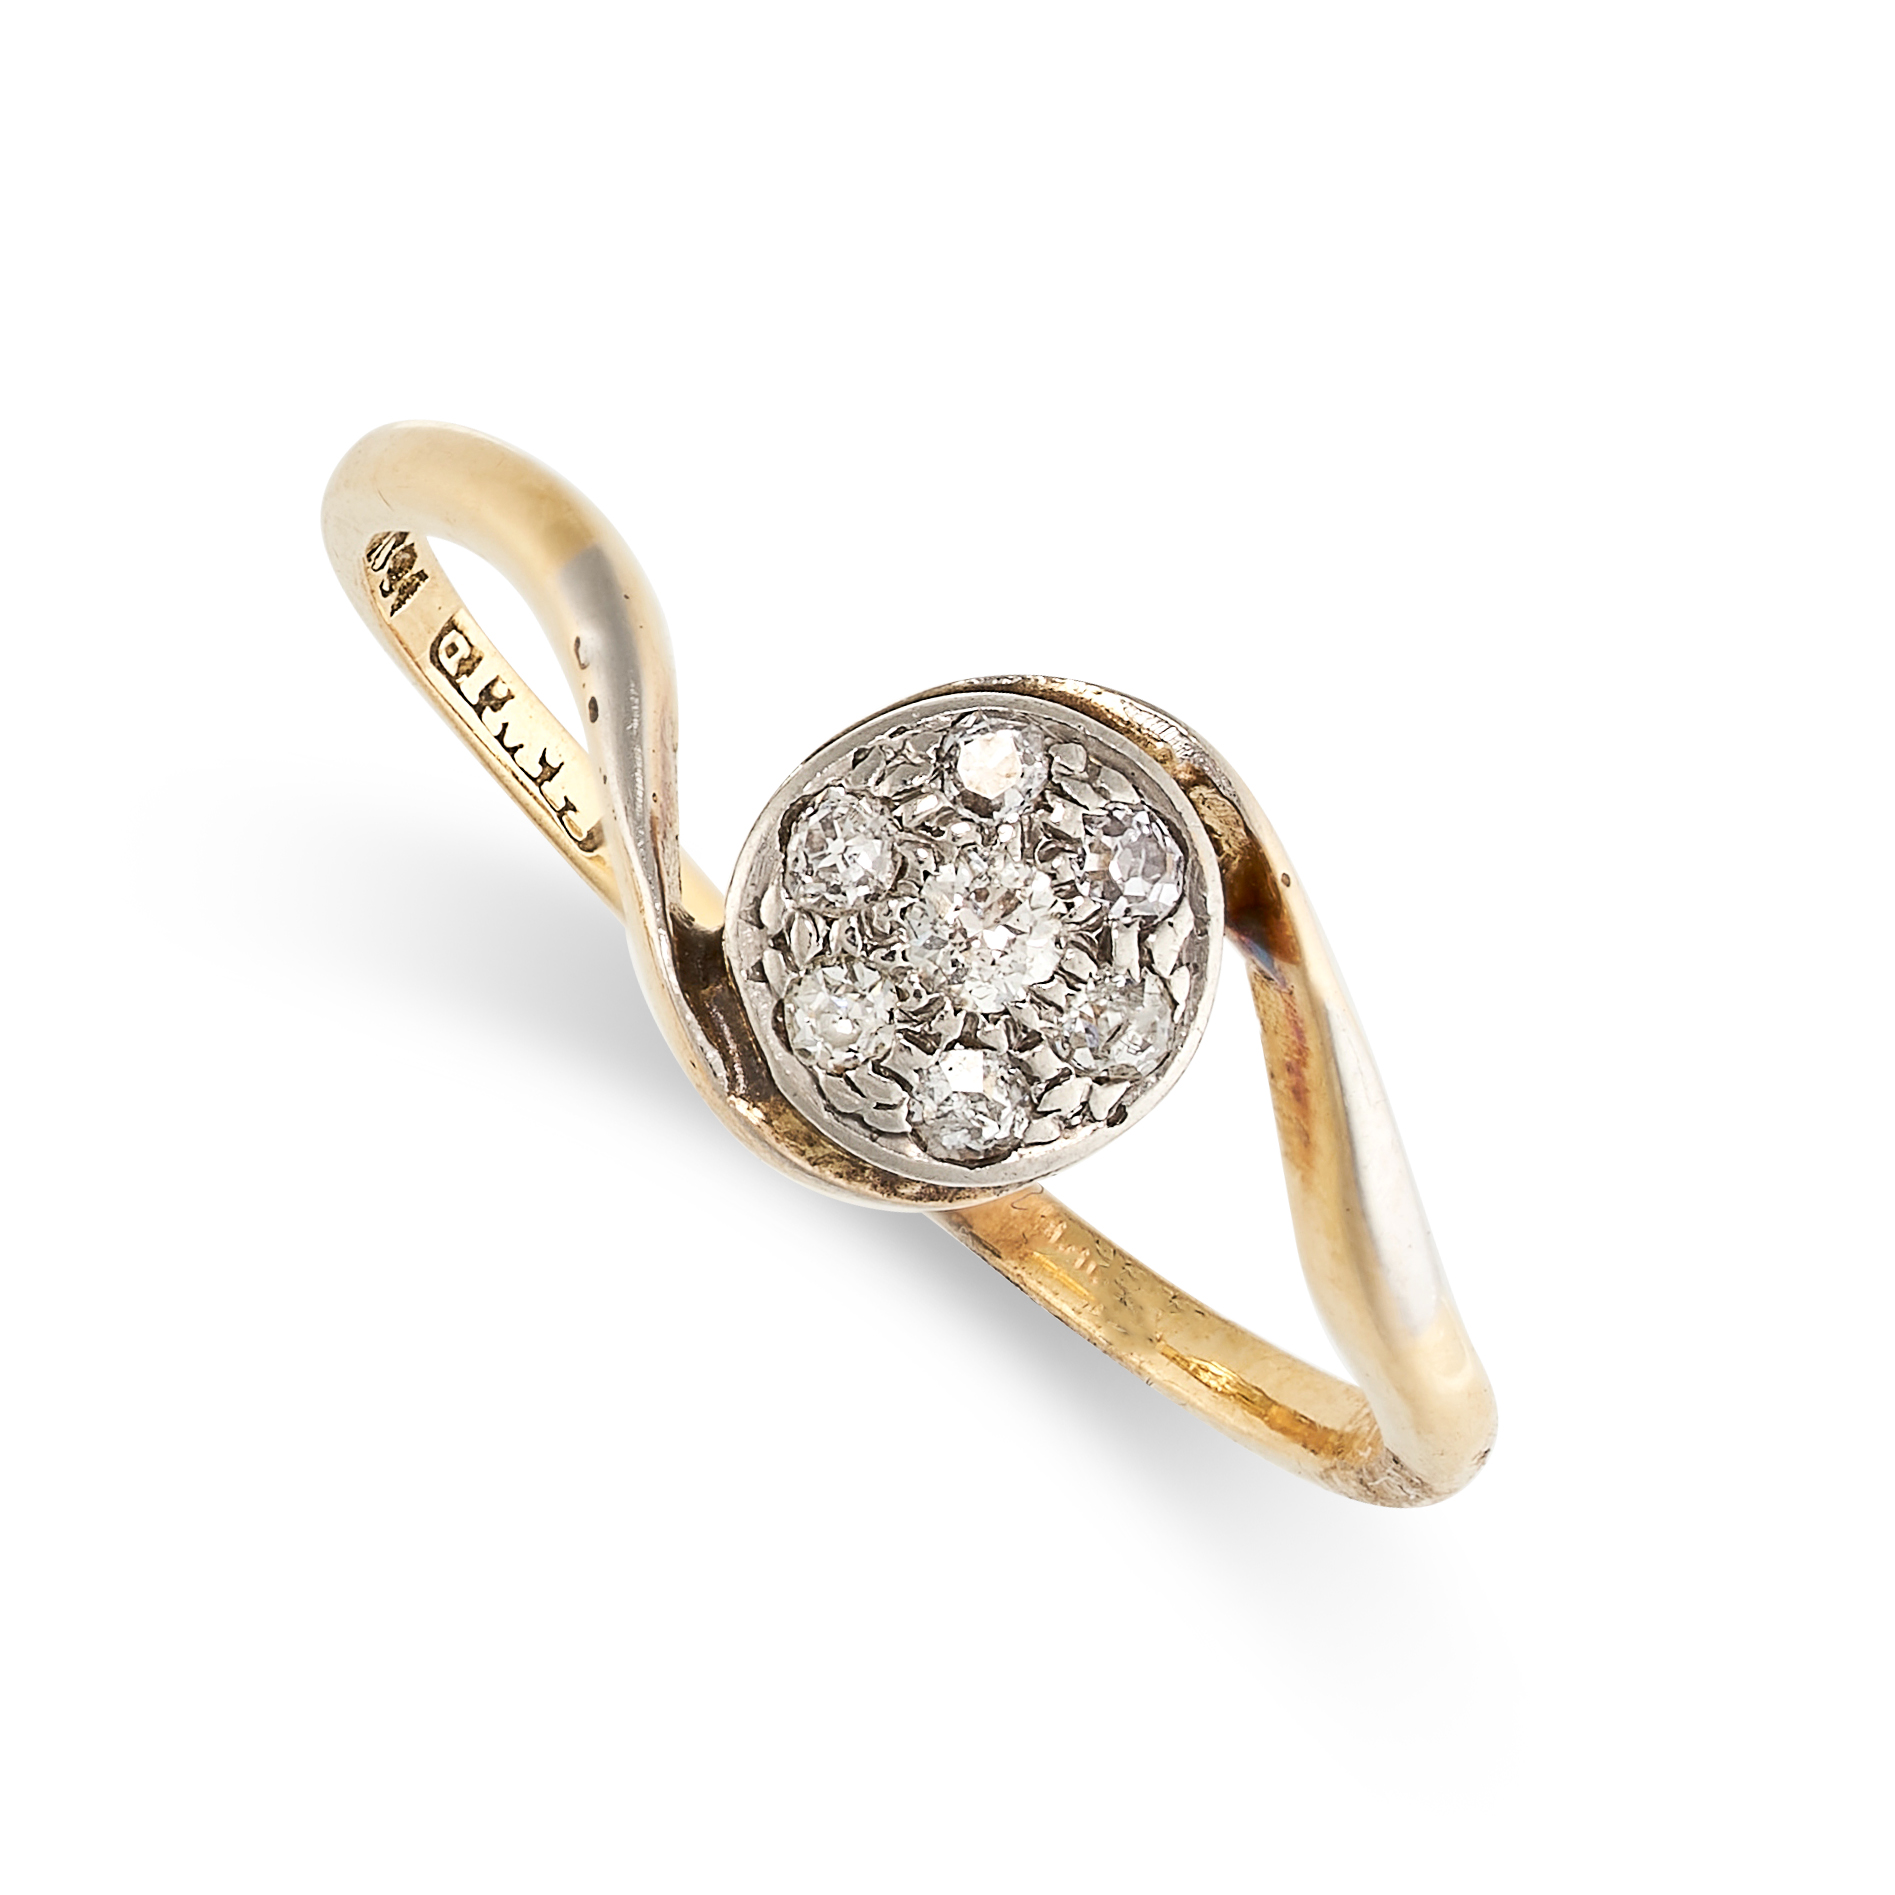 A DIAMOND CLUSTER DRESS RING in 18ct yellow gold, the stylised band set with a central circular